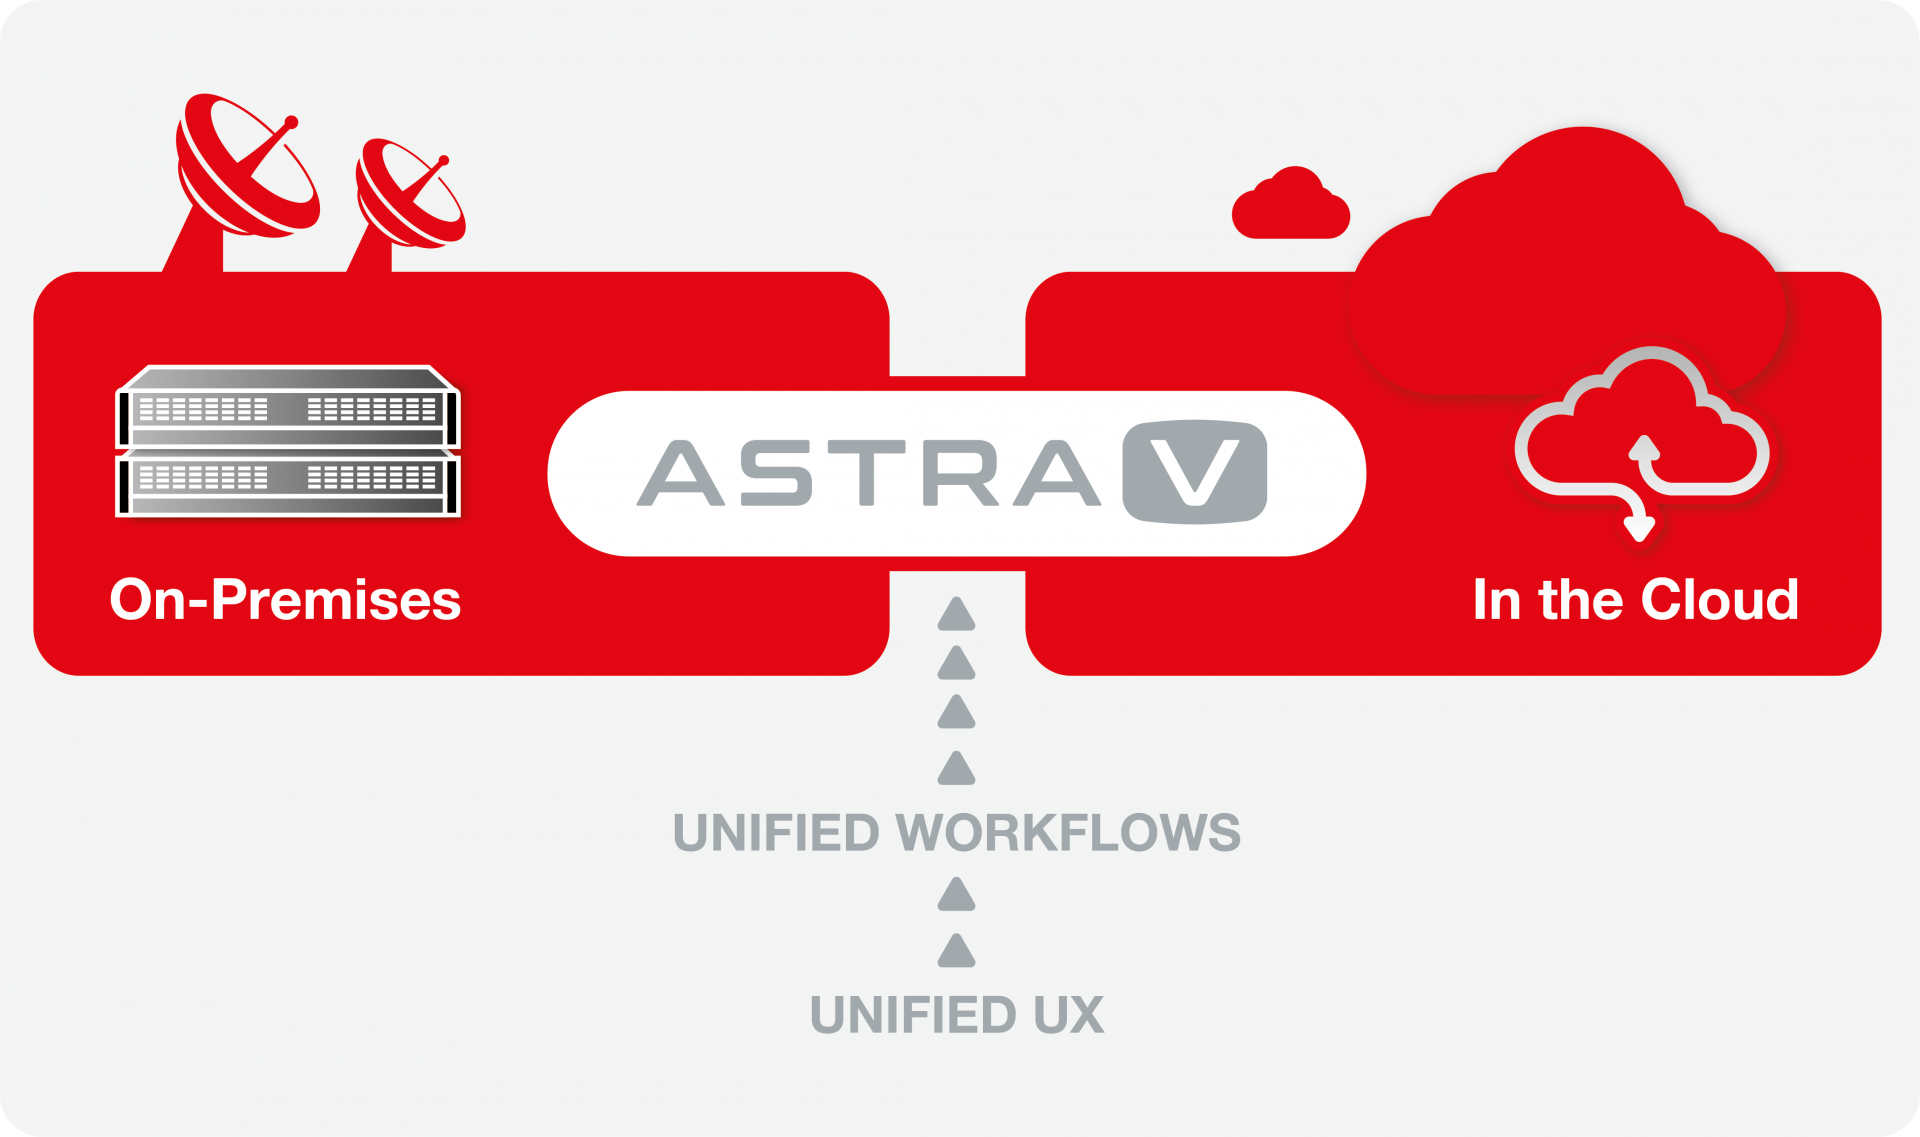 ASTRA V - The bridge that connects the On-Prem and Cloud worlds